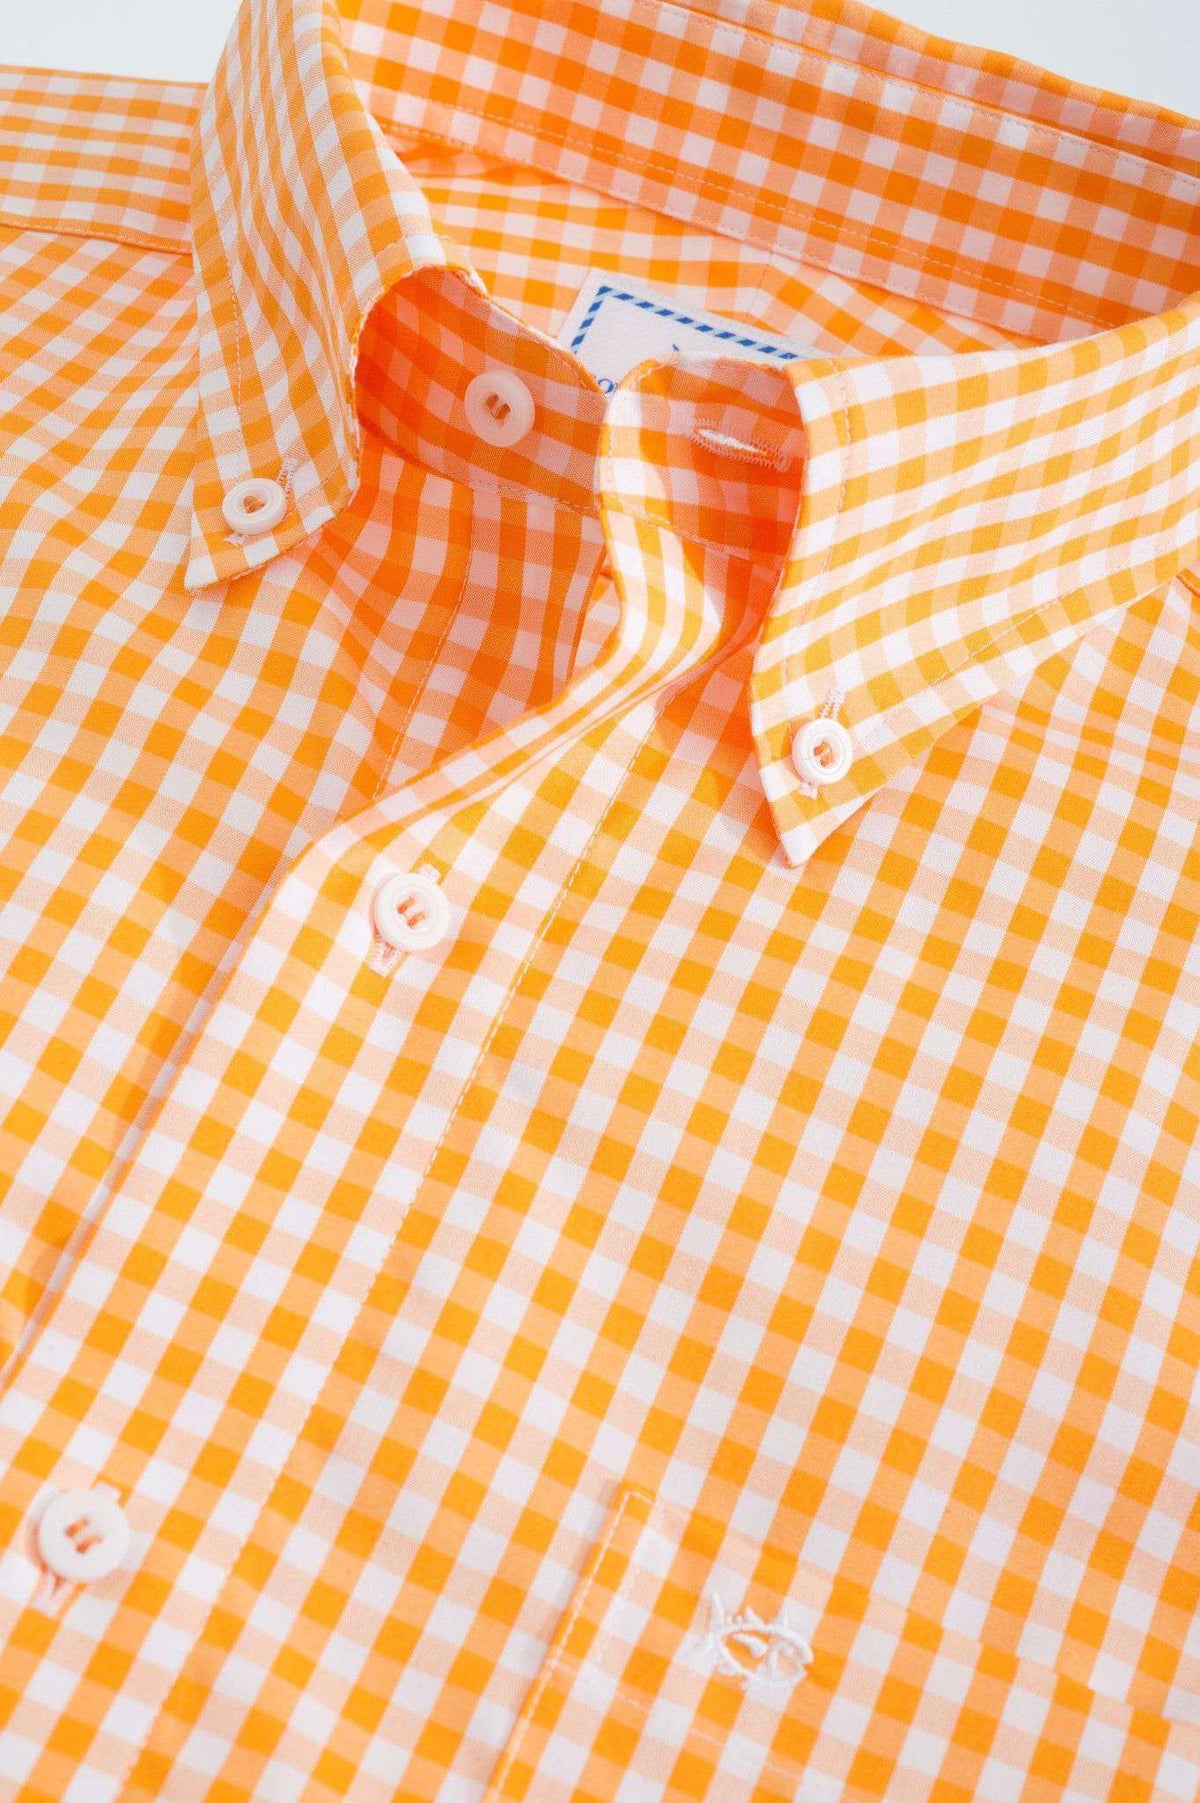 Team Colors Gingham Sport Shirt in Rocky Top Orange by Southern Tide - Country Club Prep